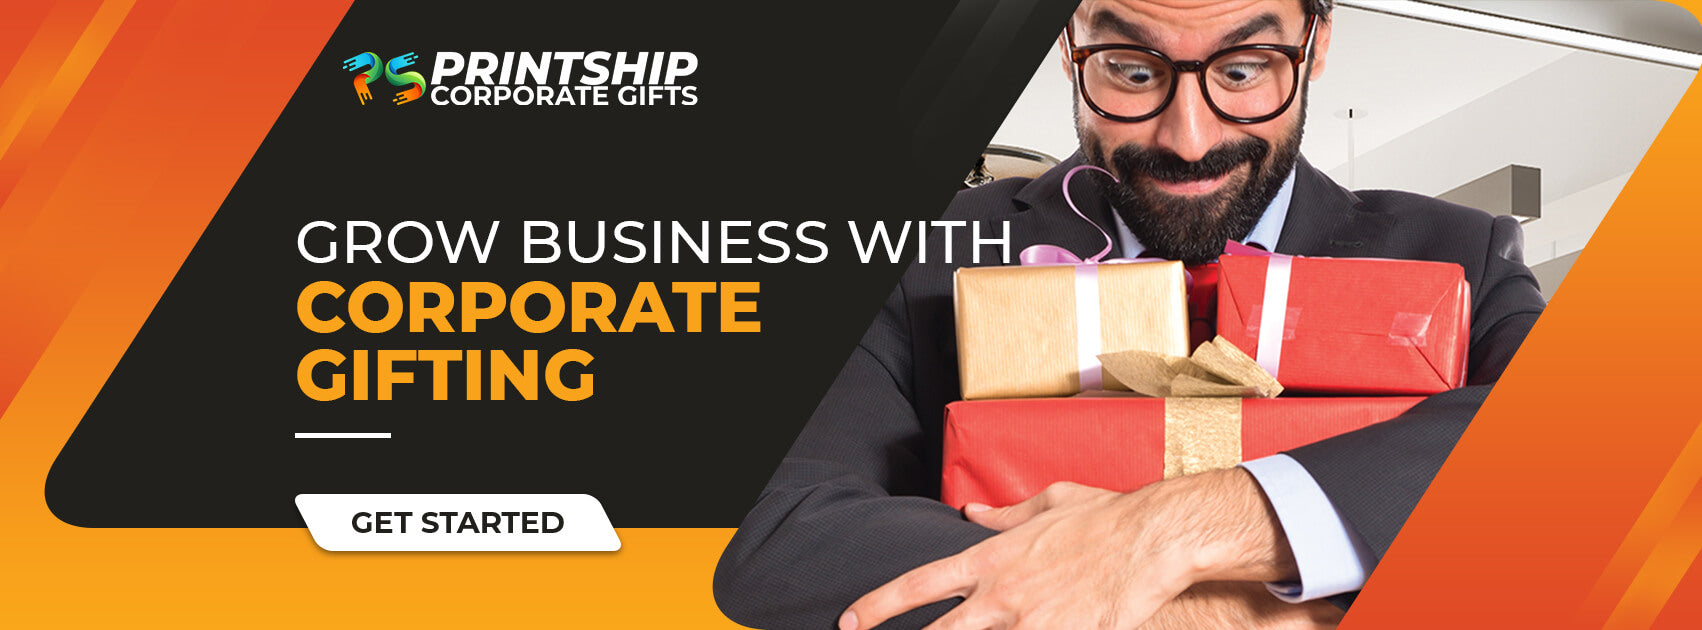 Grow Business With Print Ship Corporate Gifting Solutions